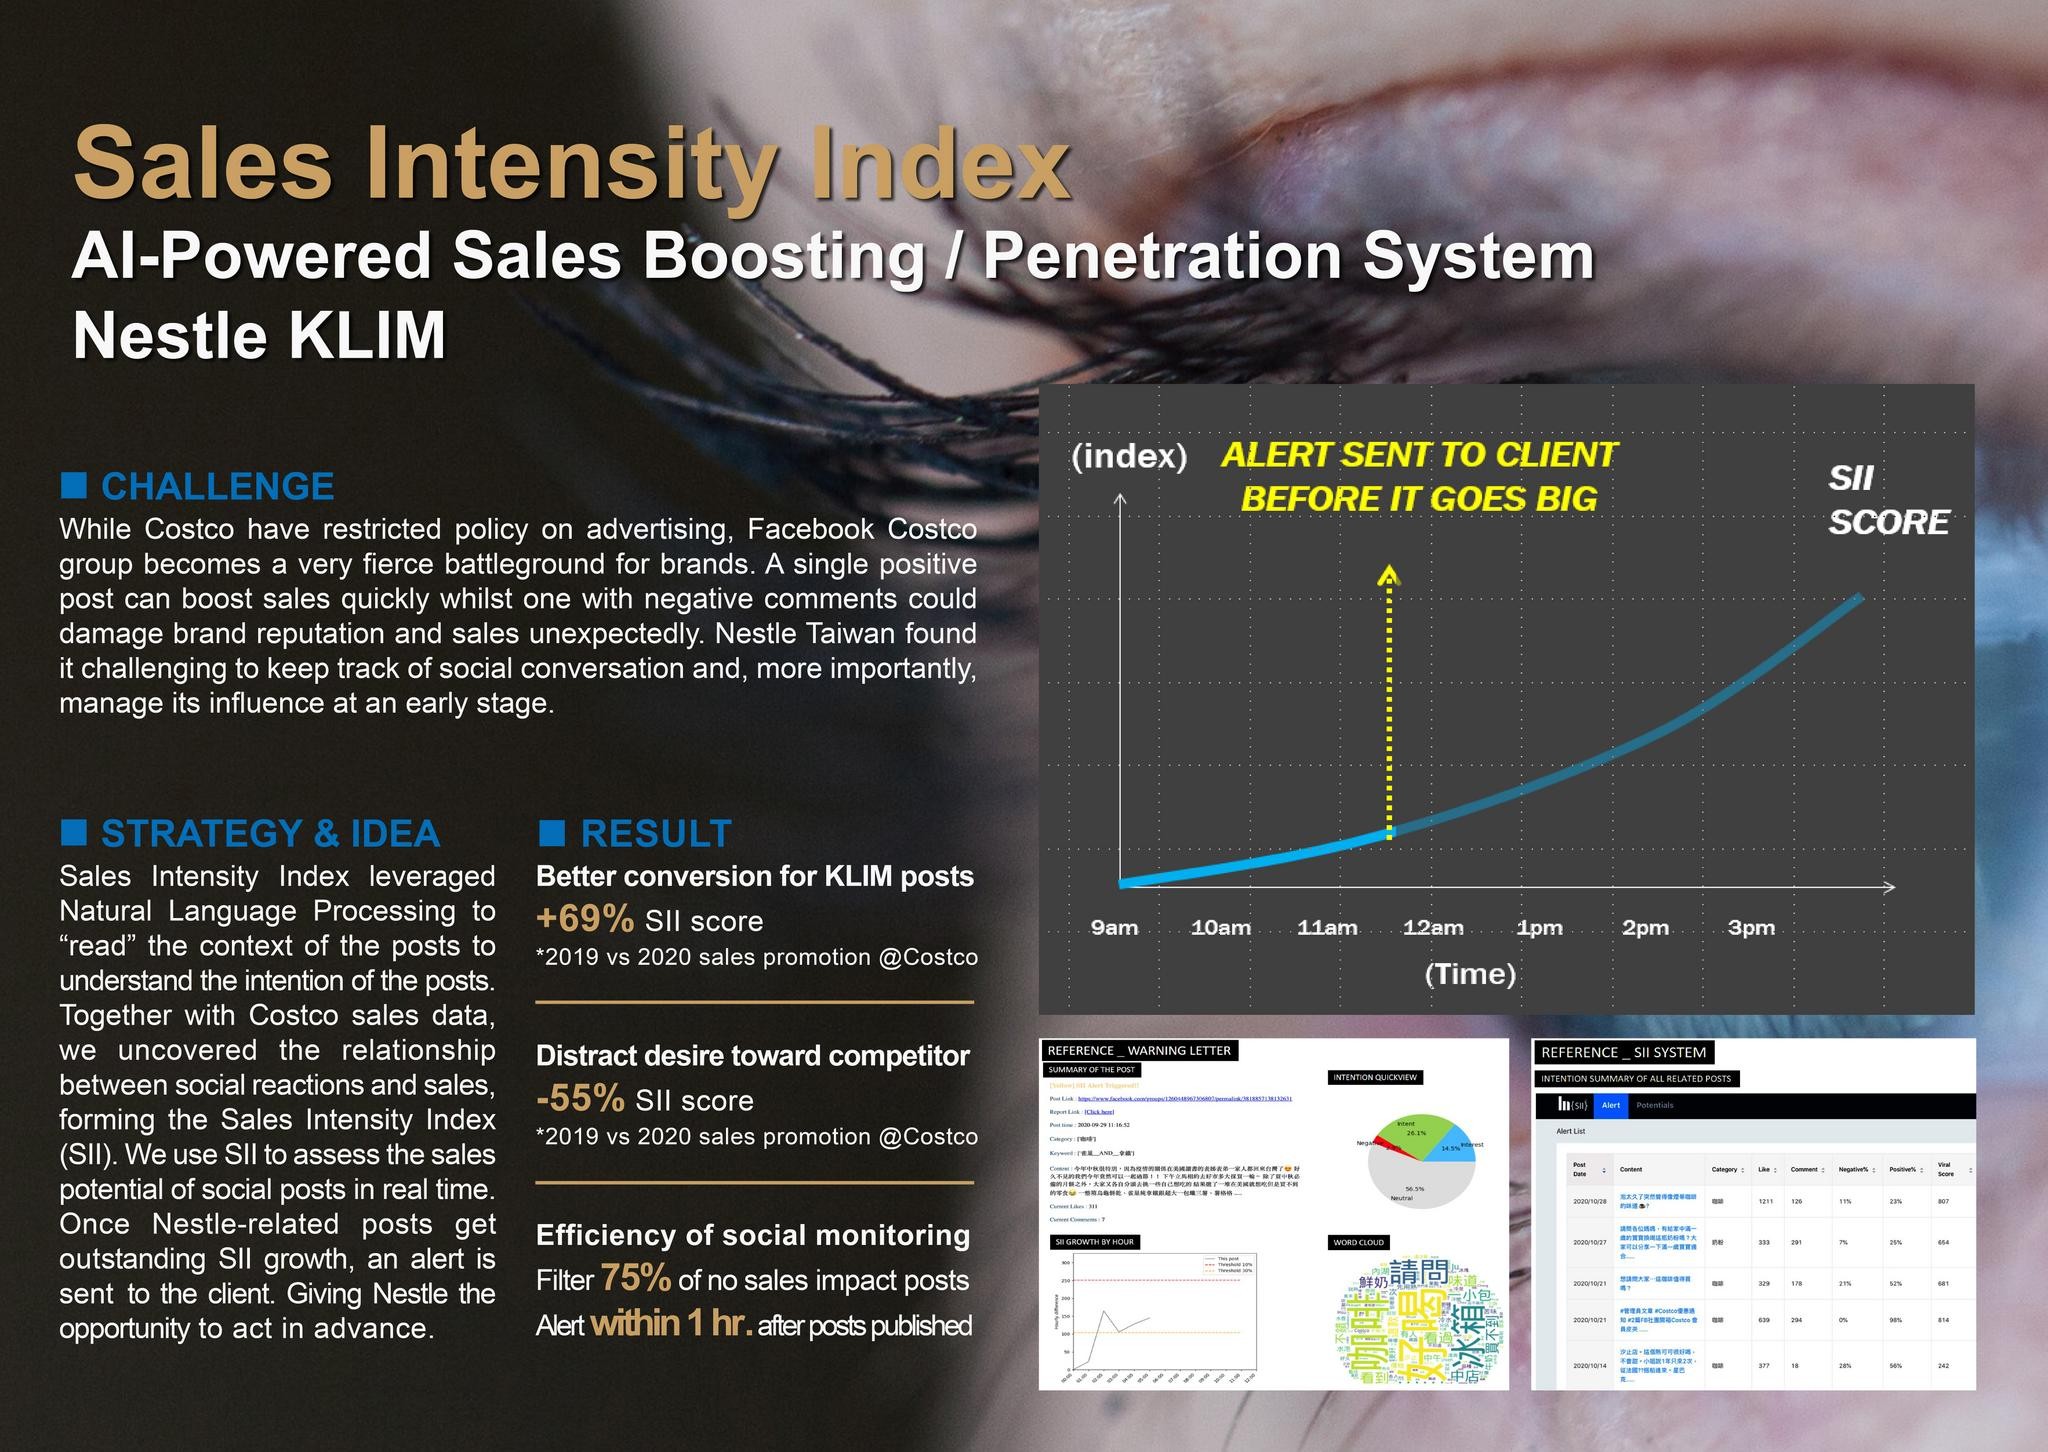 SALES INTENSITY INDEX (SII) – AI-POWERED SALES BOOSTING/ PENETRATION SYSTEM